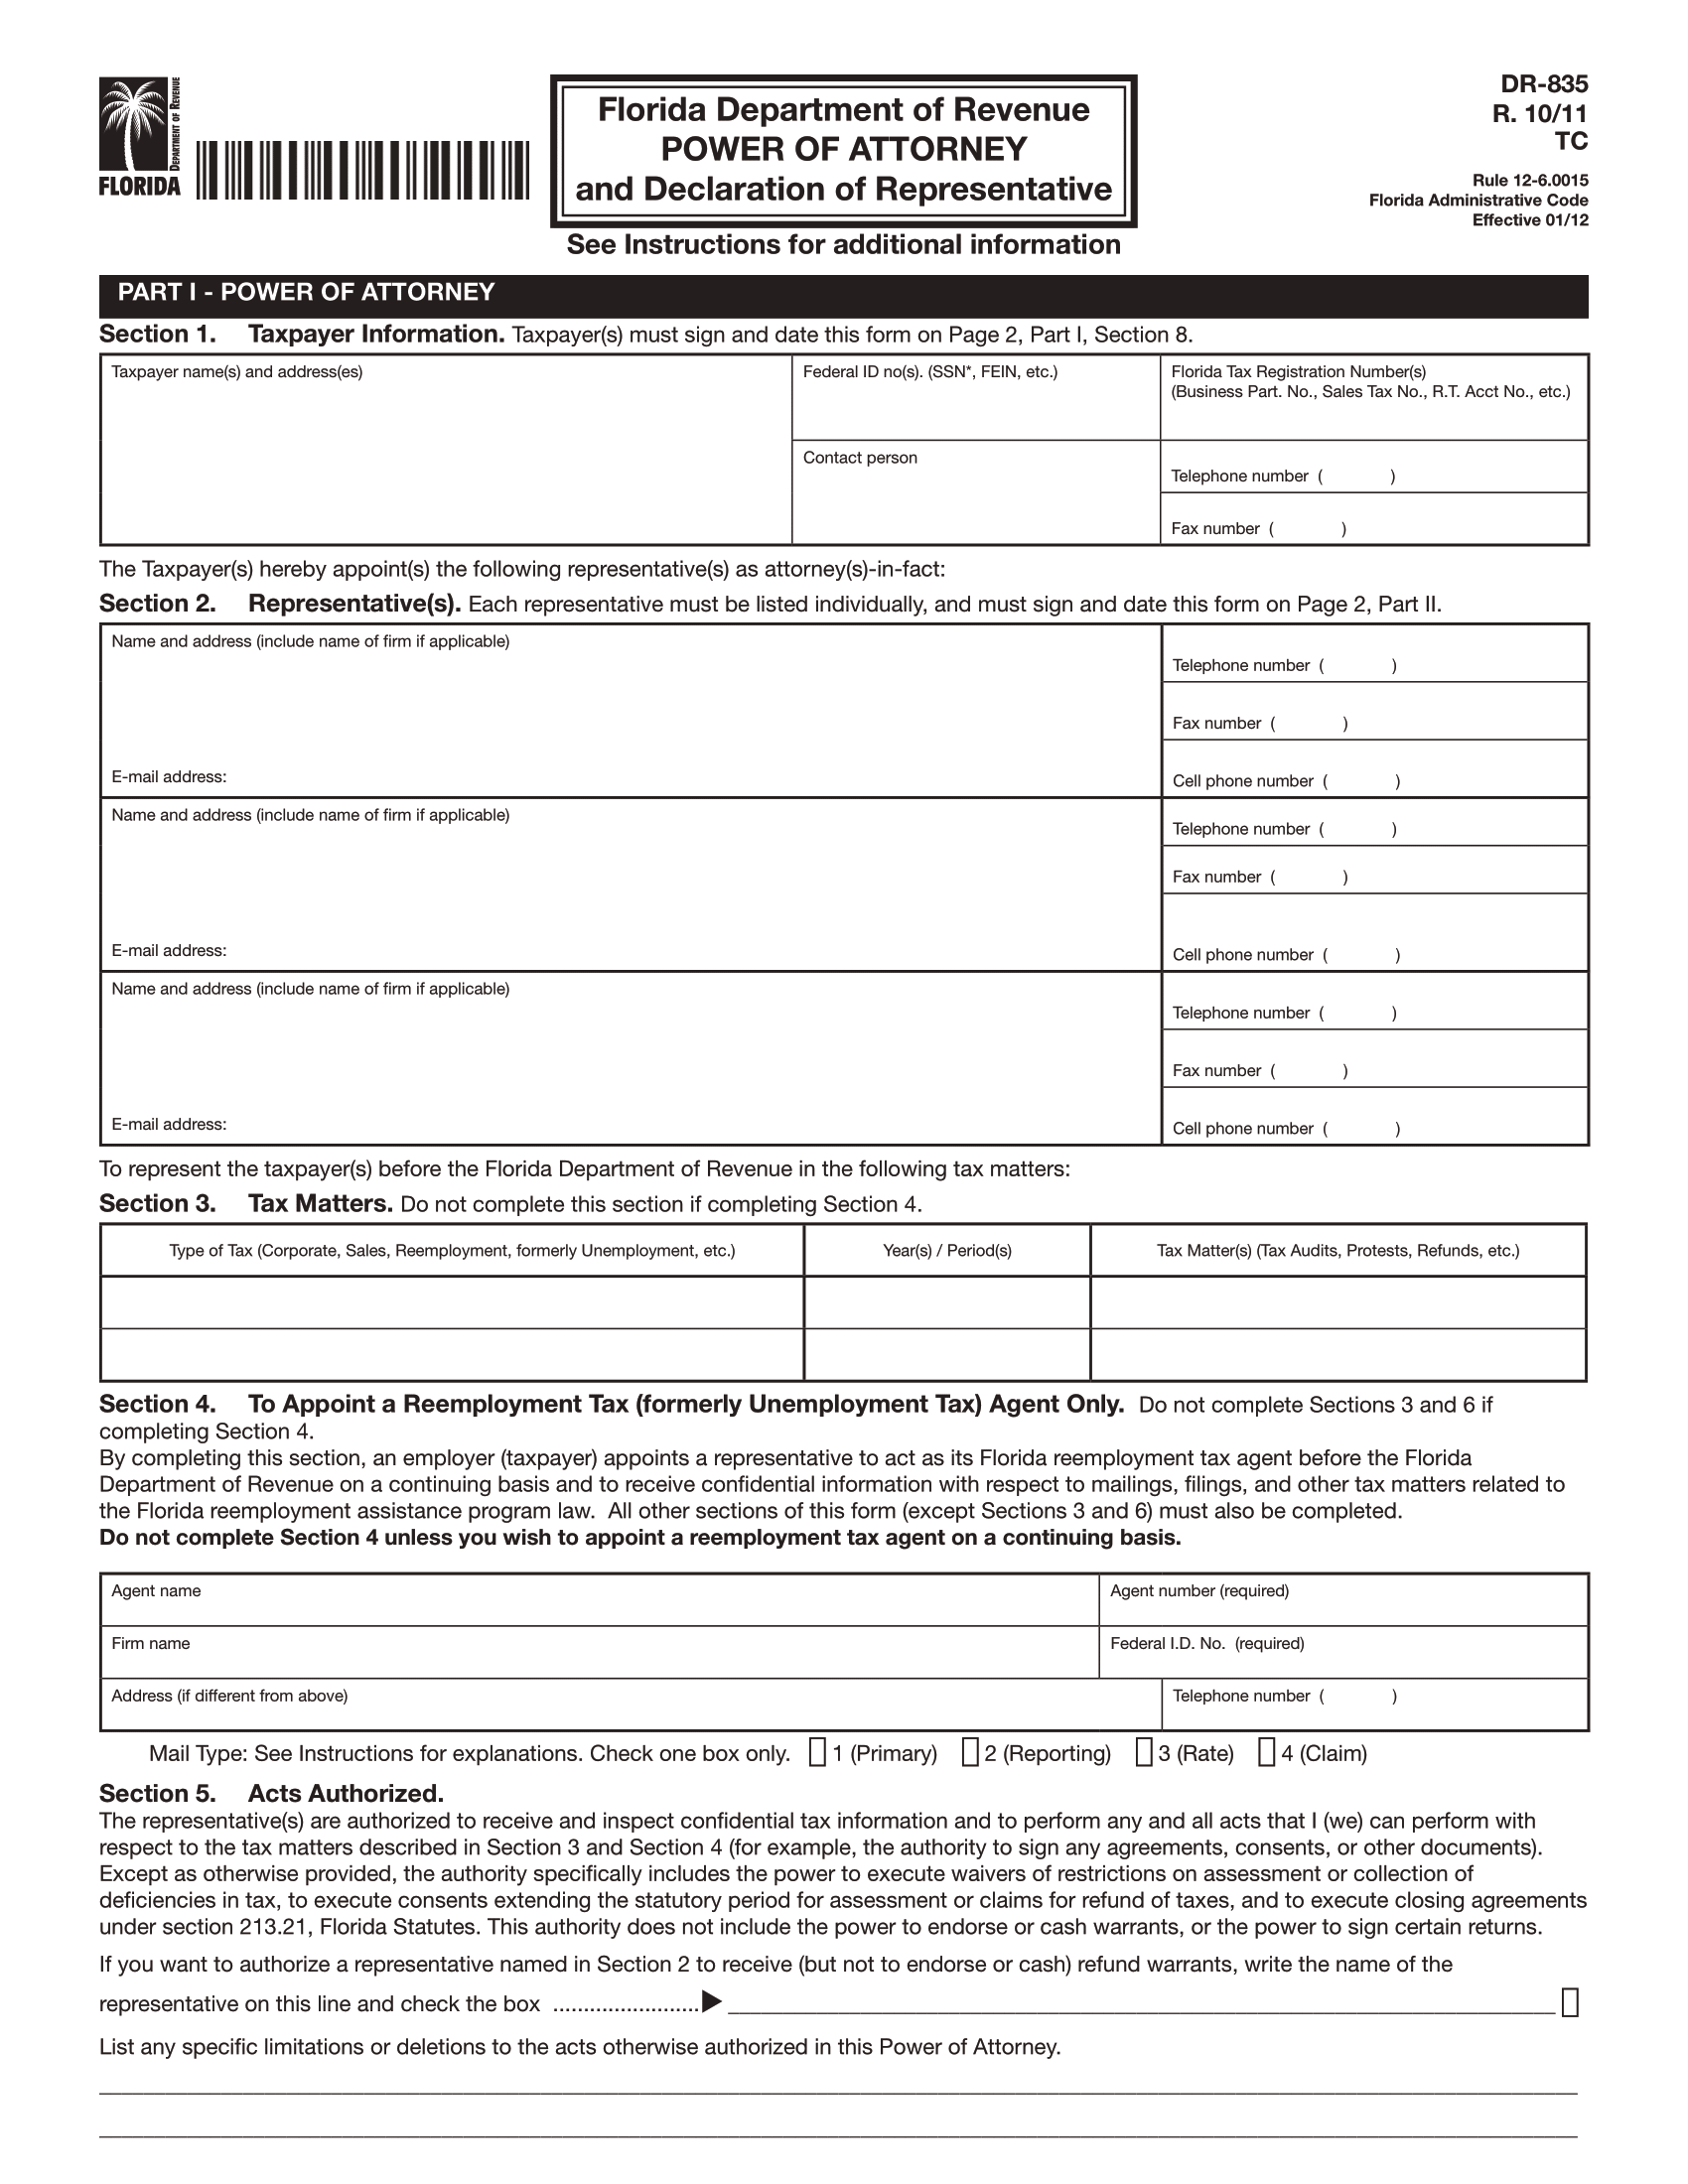 Florida Tax Power of Attorney Form DR-835